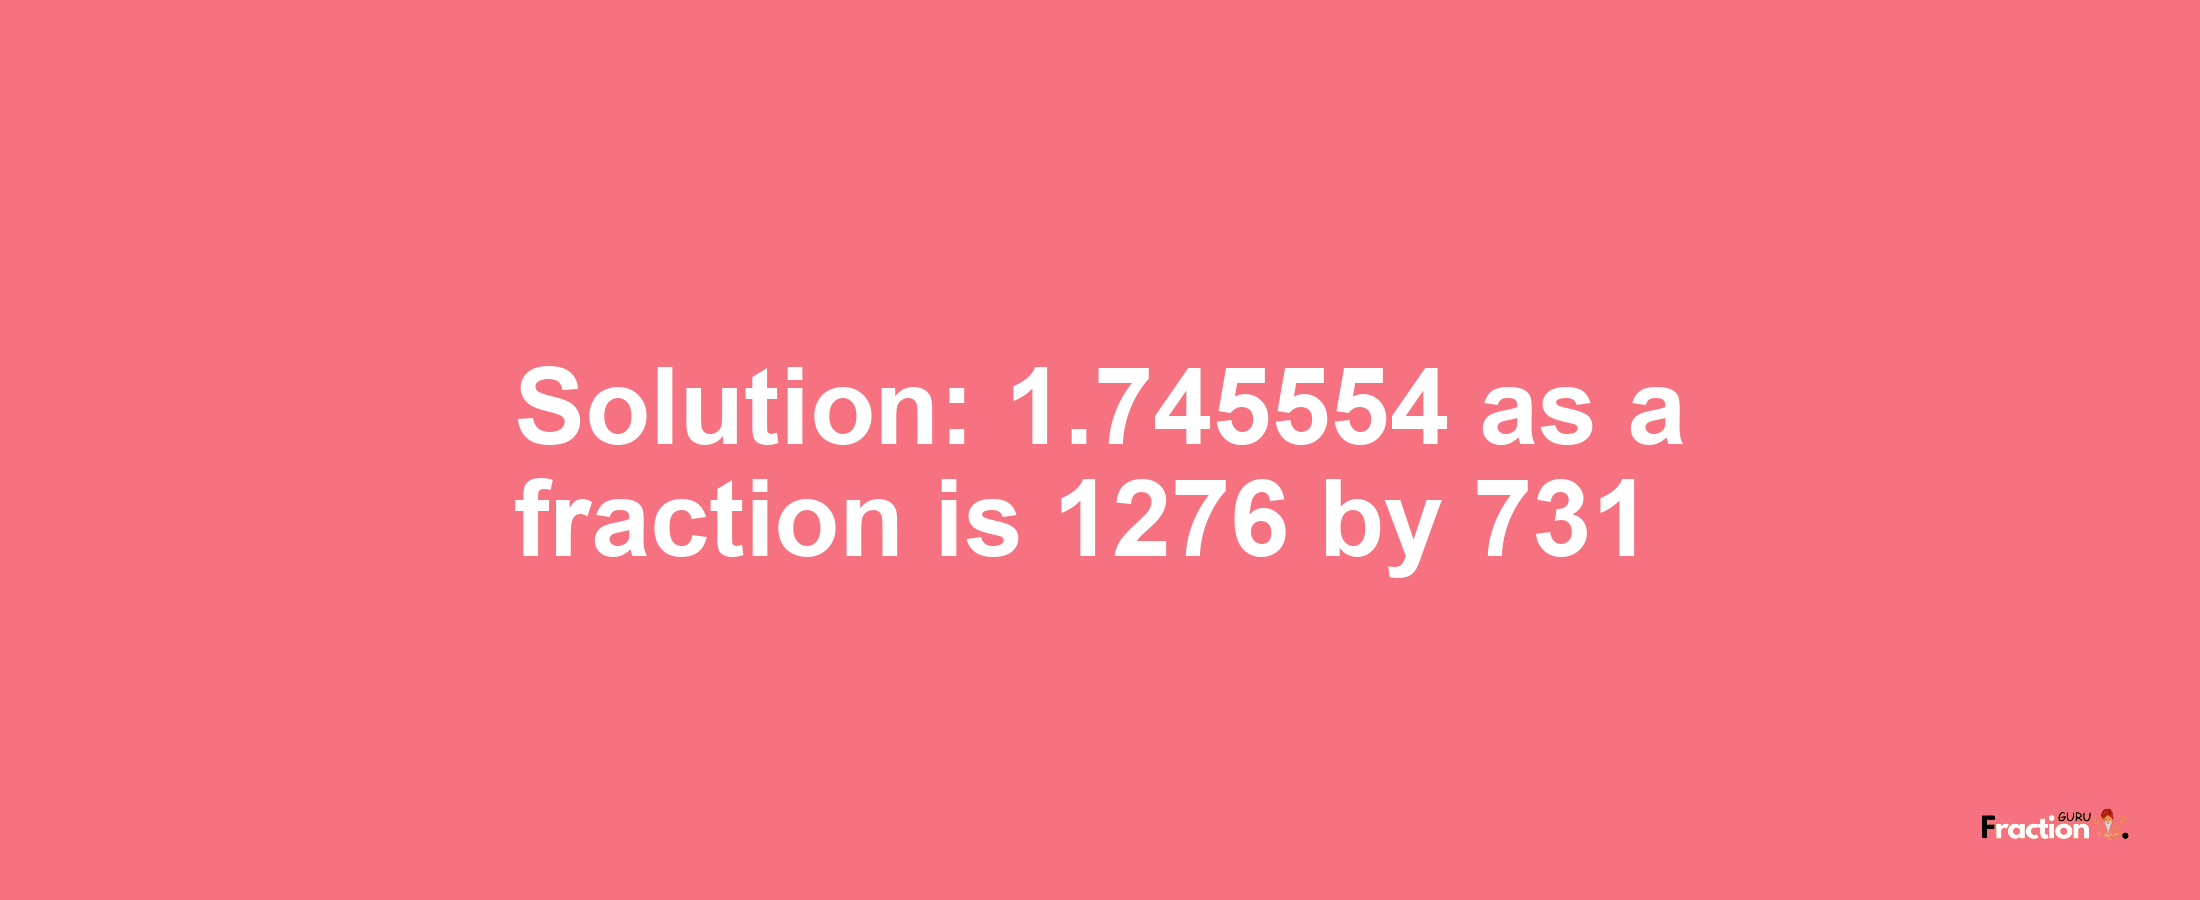 Solution:1.745554 as a fraction is 1276/731